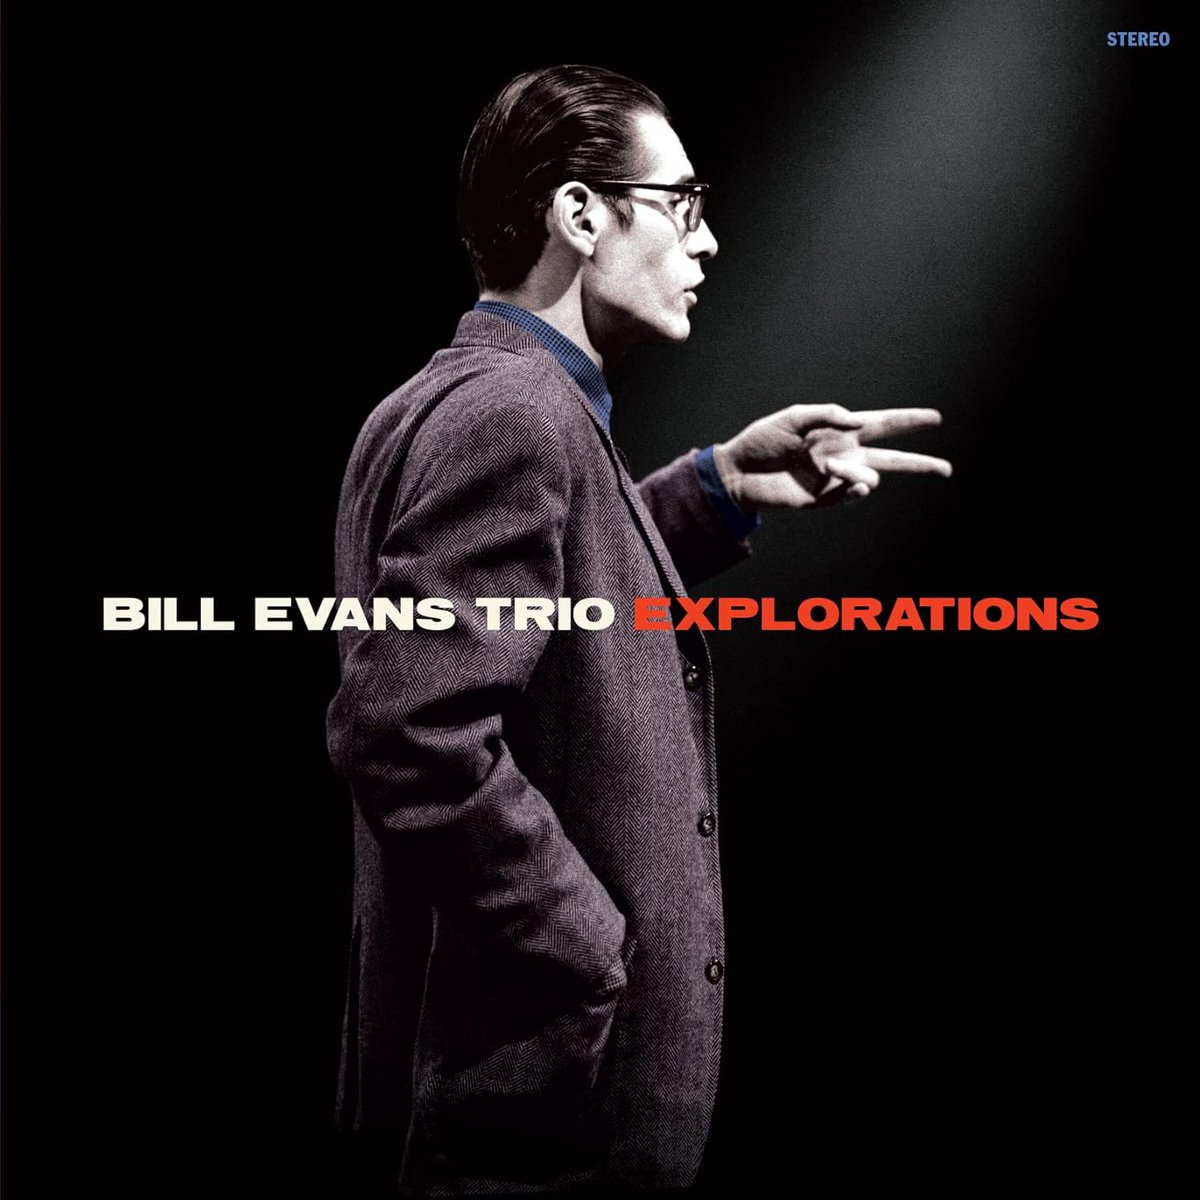 Out 31 May, #BillEvans Explorations coloured LP, on 20th Century Masterworks.